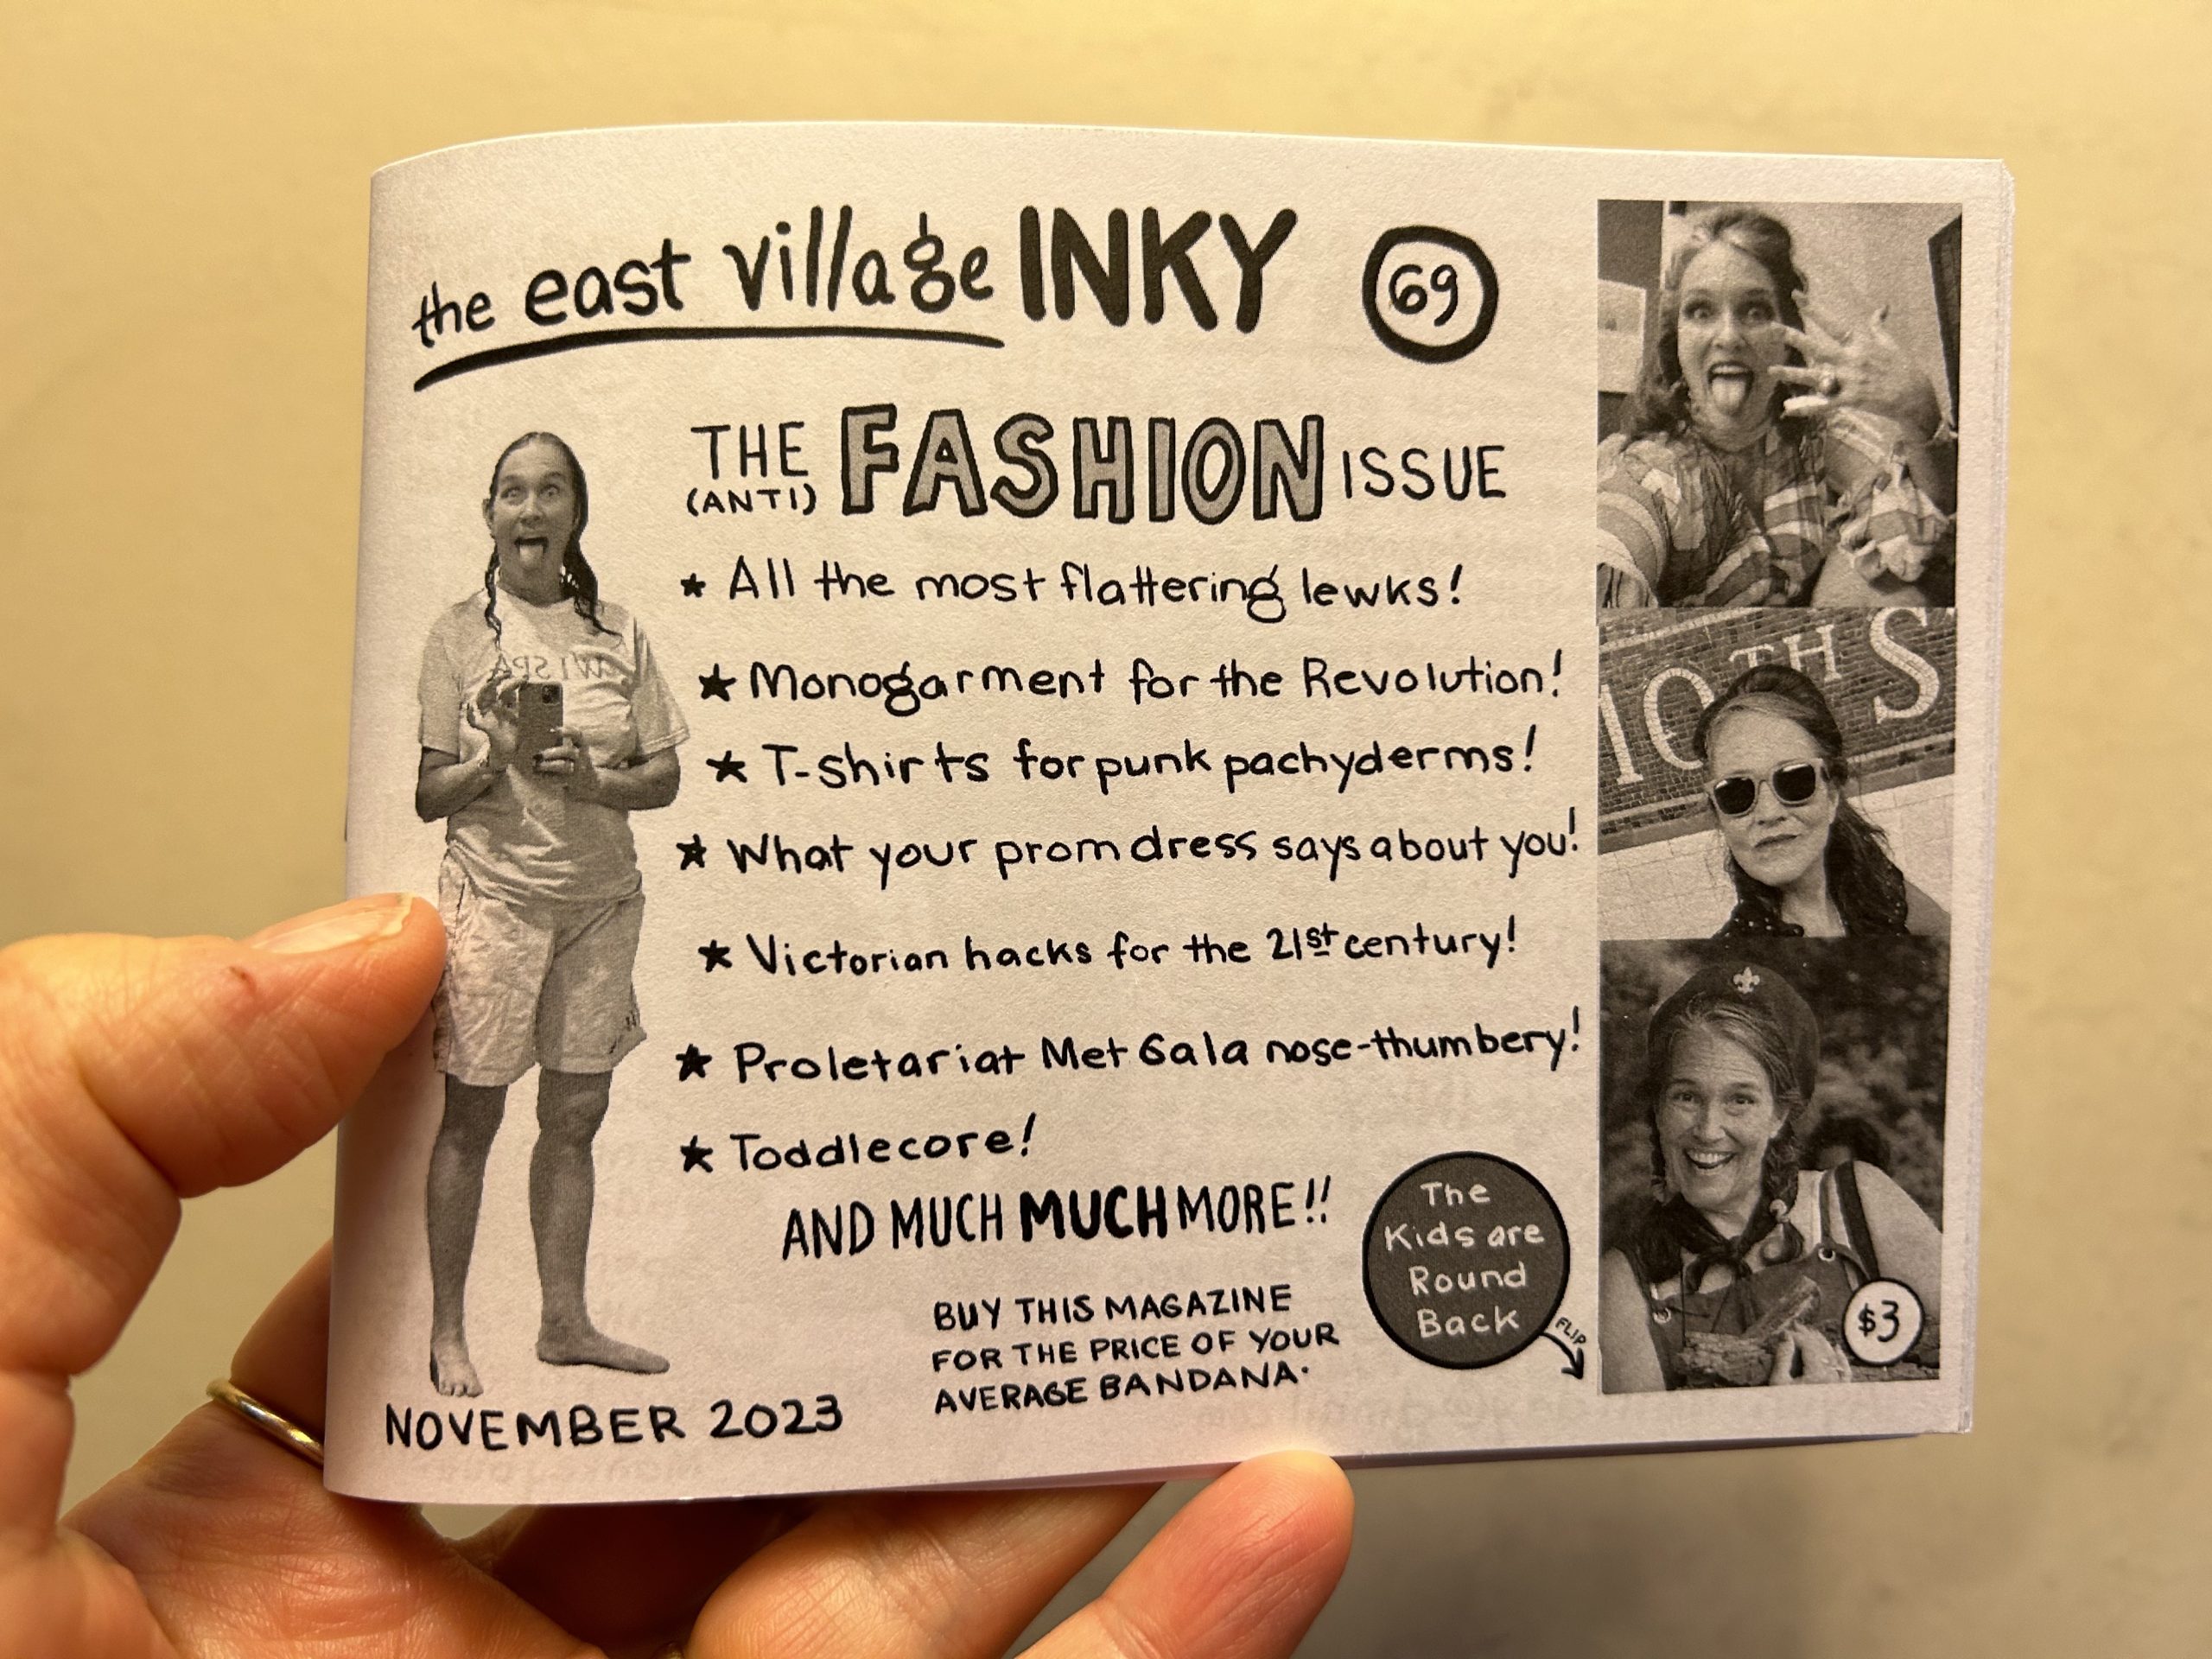 The East Village Inky No. 69